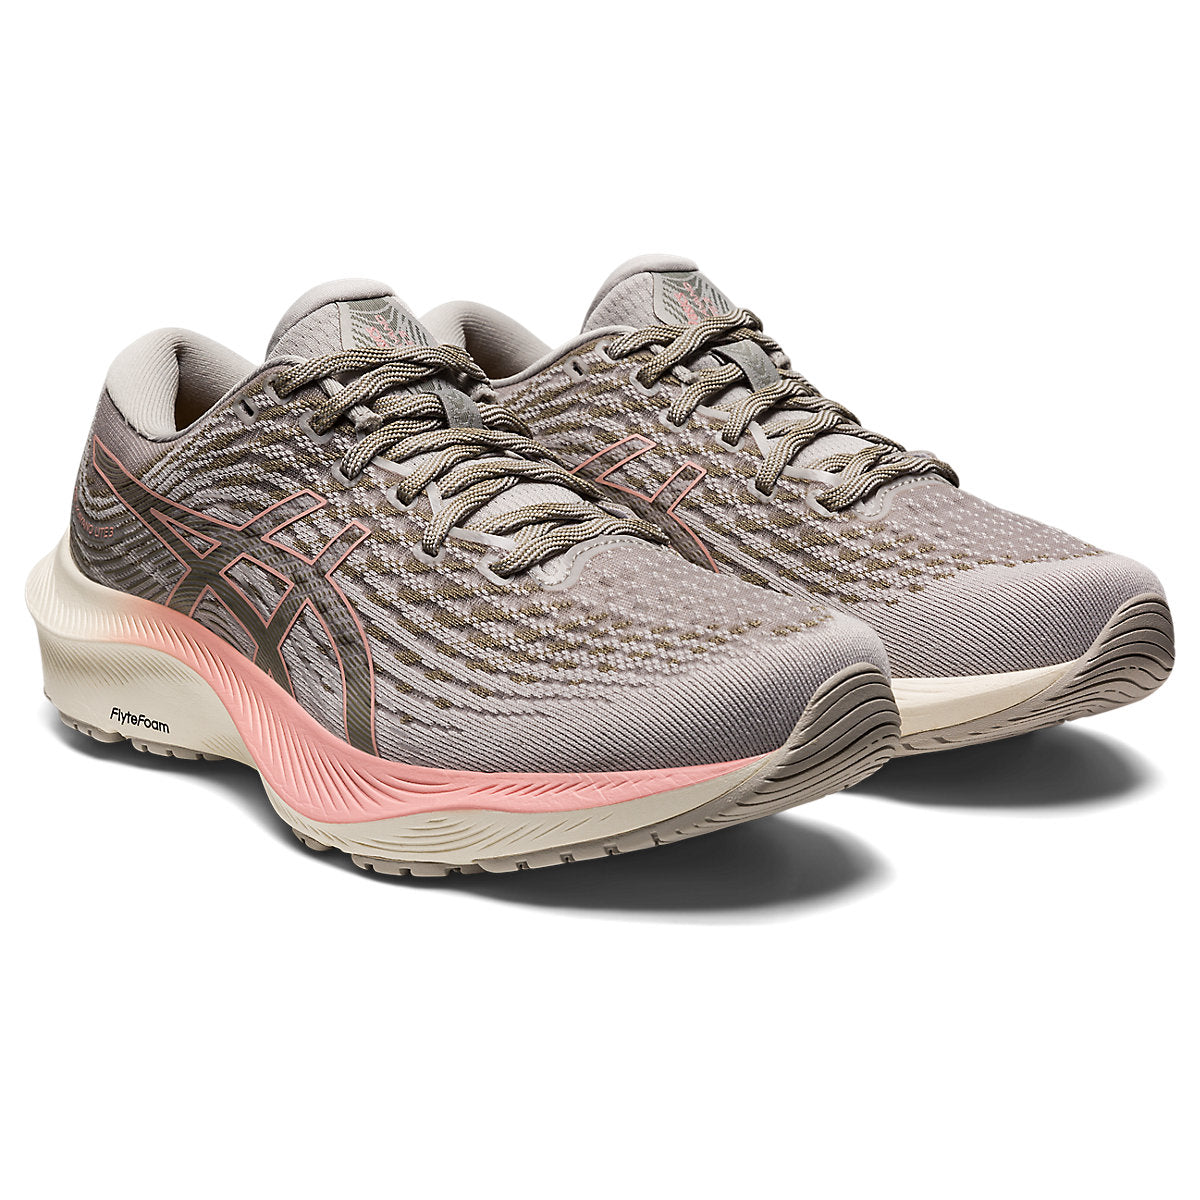 Asics, GEL-KAYANO® LITE 3, Women's, Oyster Grey/Frosted Rose